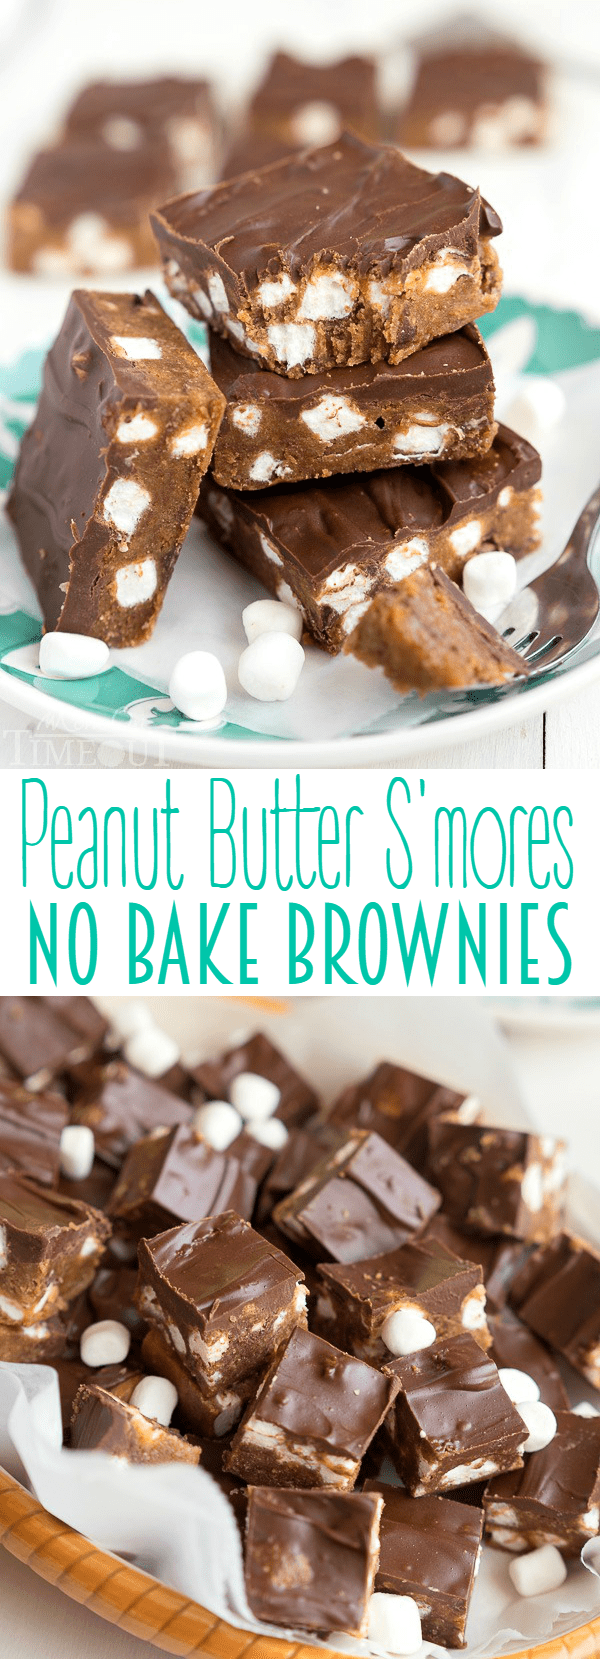 Decadent Peanut Butter S'mores No Bake Brownies can be whipped up in a jiffy and are just perfect for the hot summer months! This easy dessert recipe will having you coming back again and again. Cut them into small bites to feed a crowd! | MomOnTimeout.com